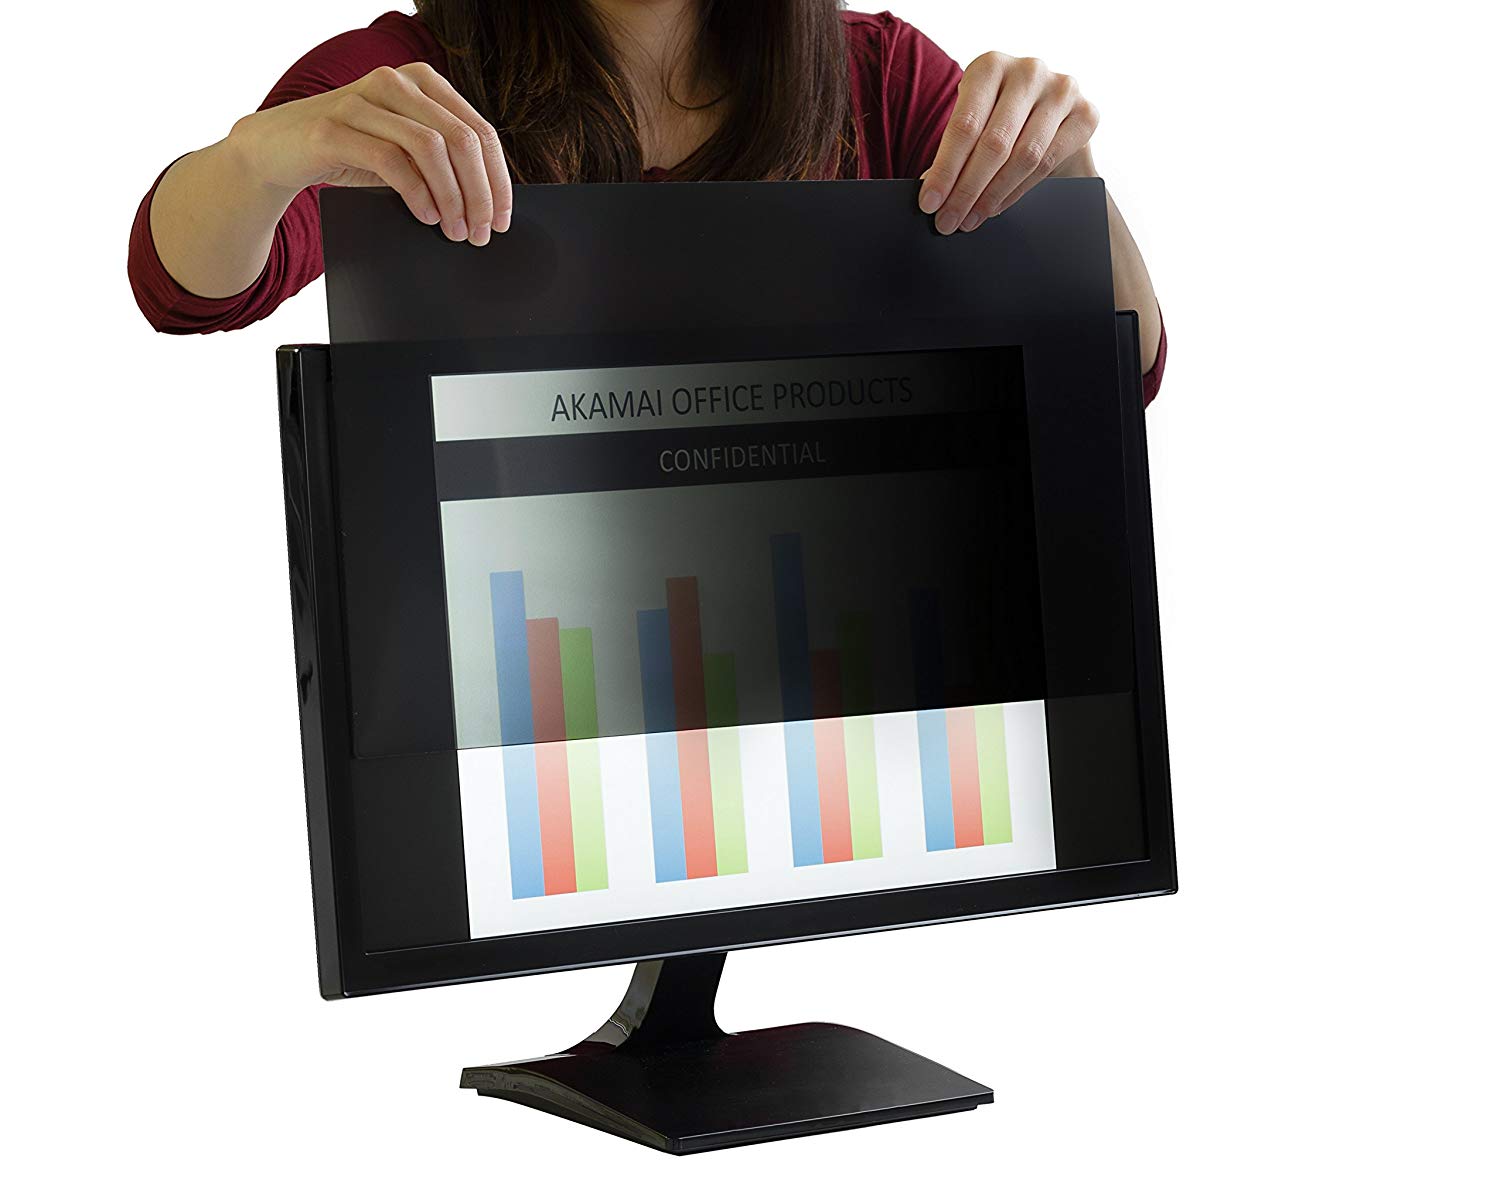 Akamai Office Products 23.0 inch (Diagonally Measured) Privacy Screen Filter for Widescreen Computer Monitors-Anti Glare (AP23.0W9)